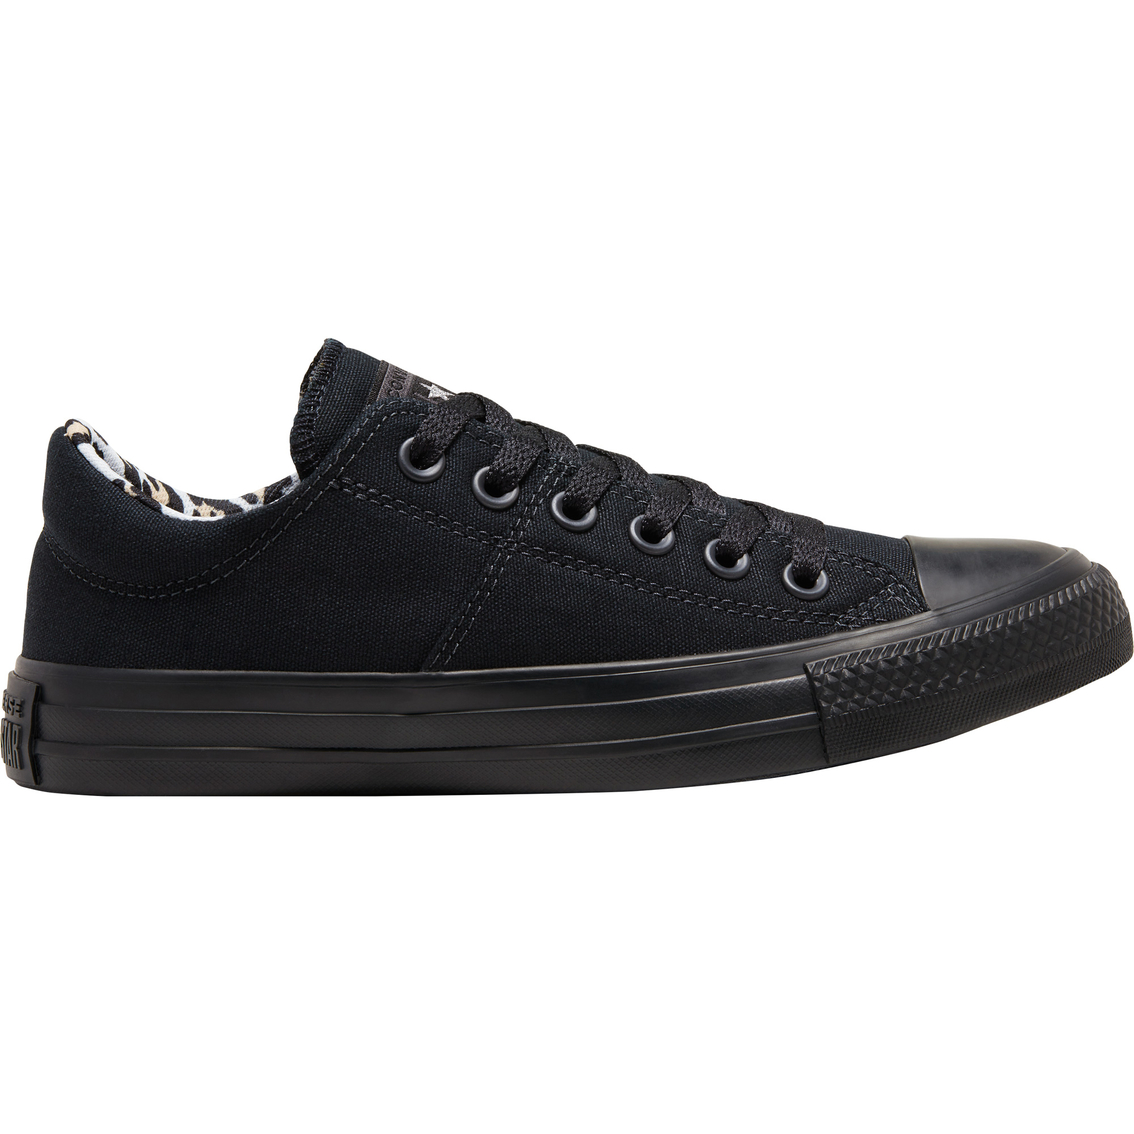 converse all star madison low top